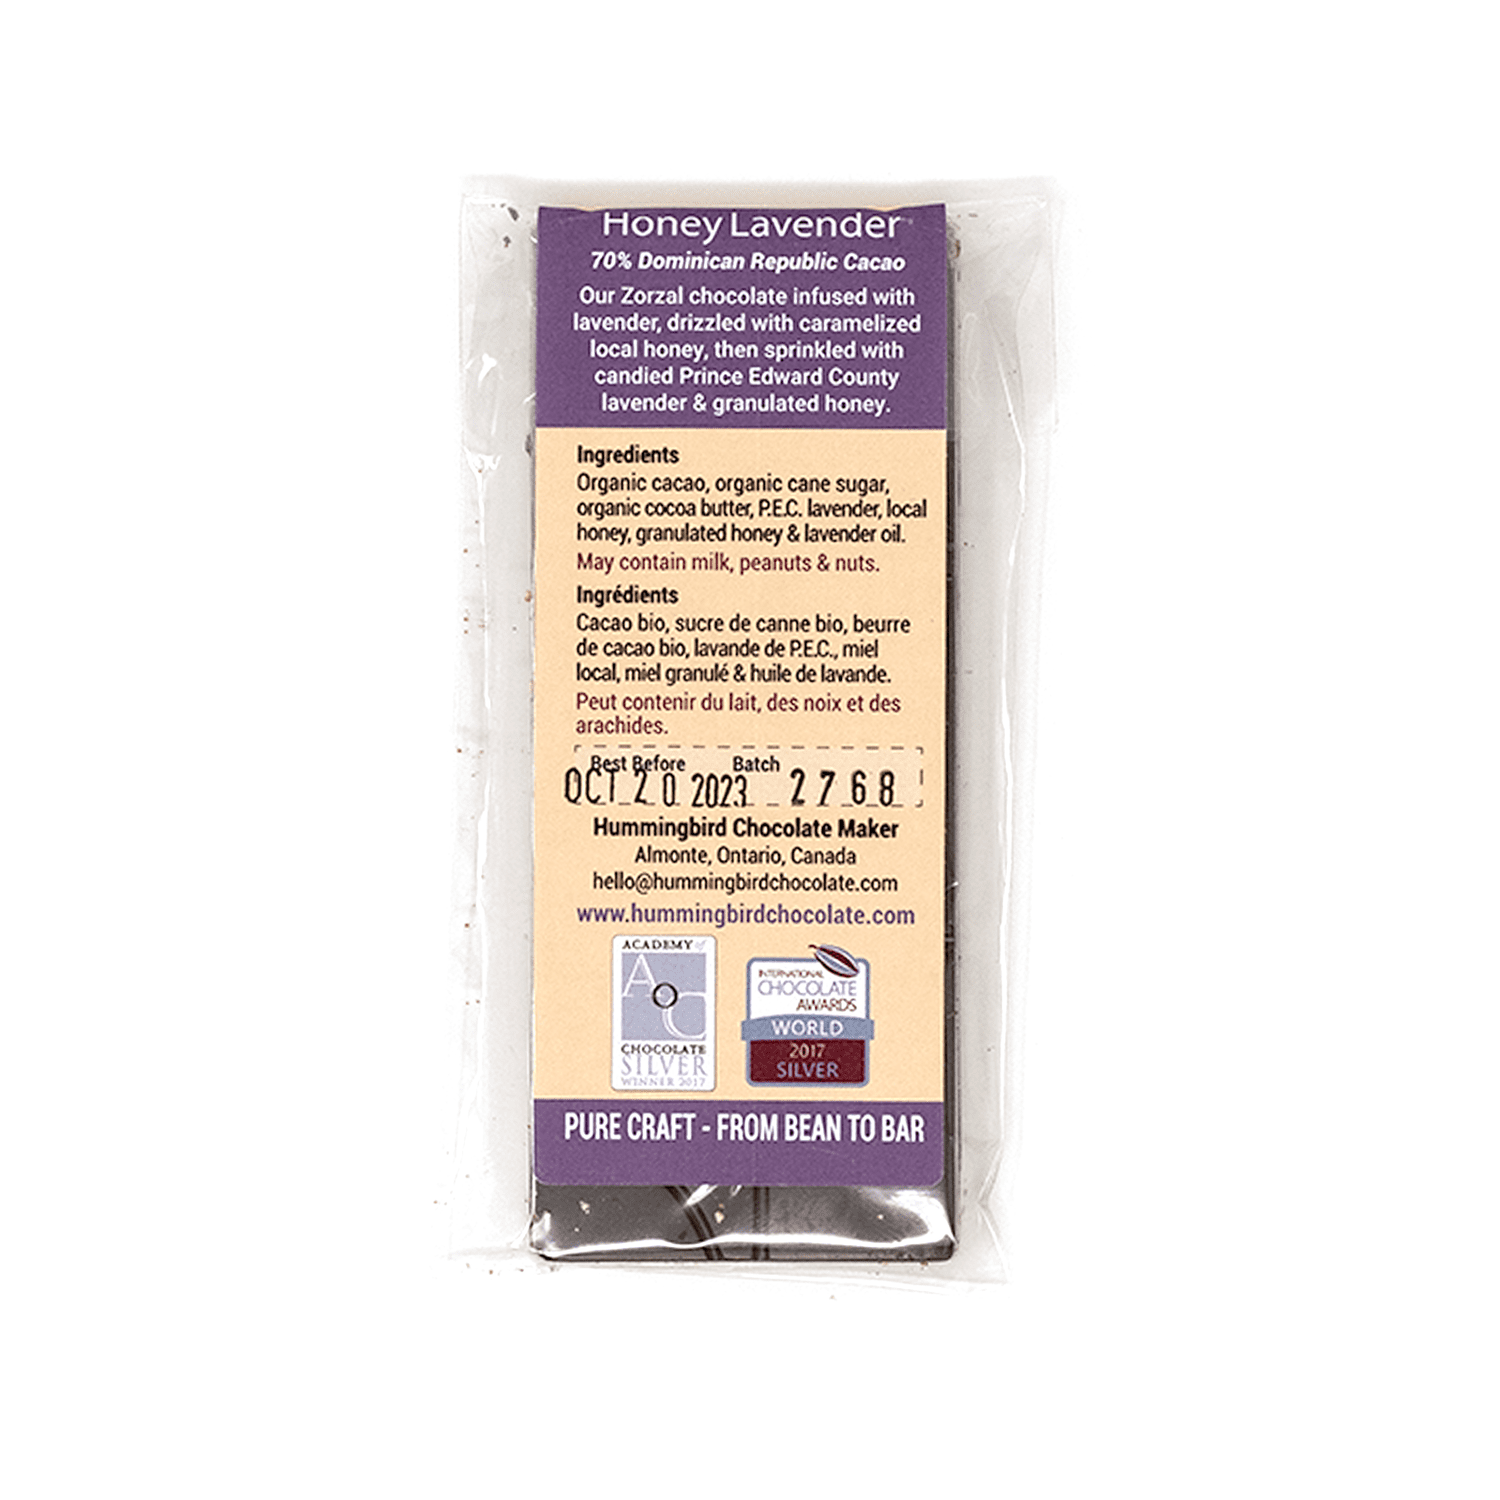 The back of the package of Hummingbird Chocolate's Honey Lavender bar.